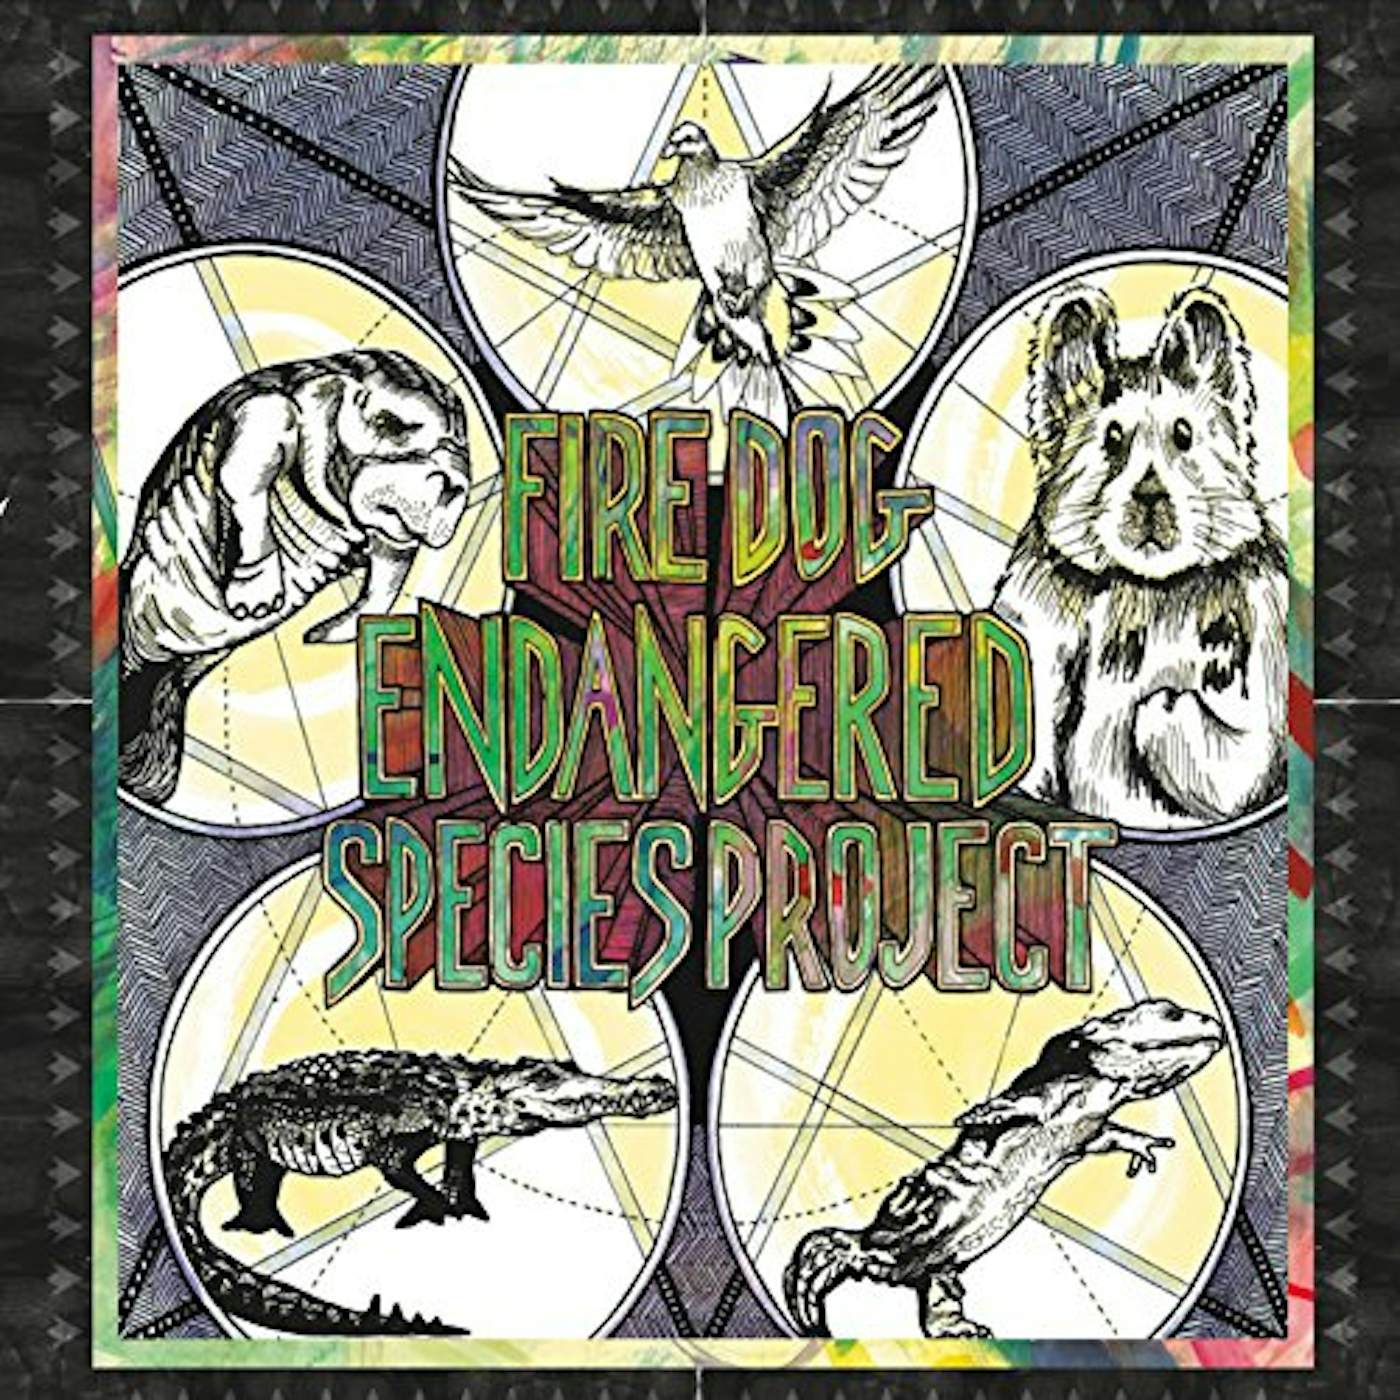 Fire Dog ENDANGERED SPECIES PROJECT CD